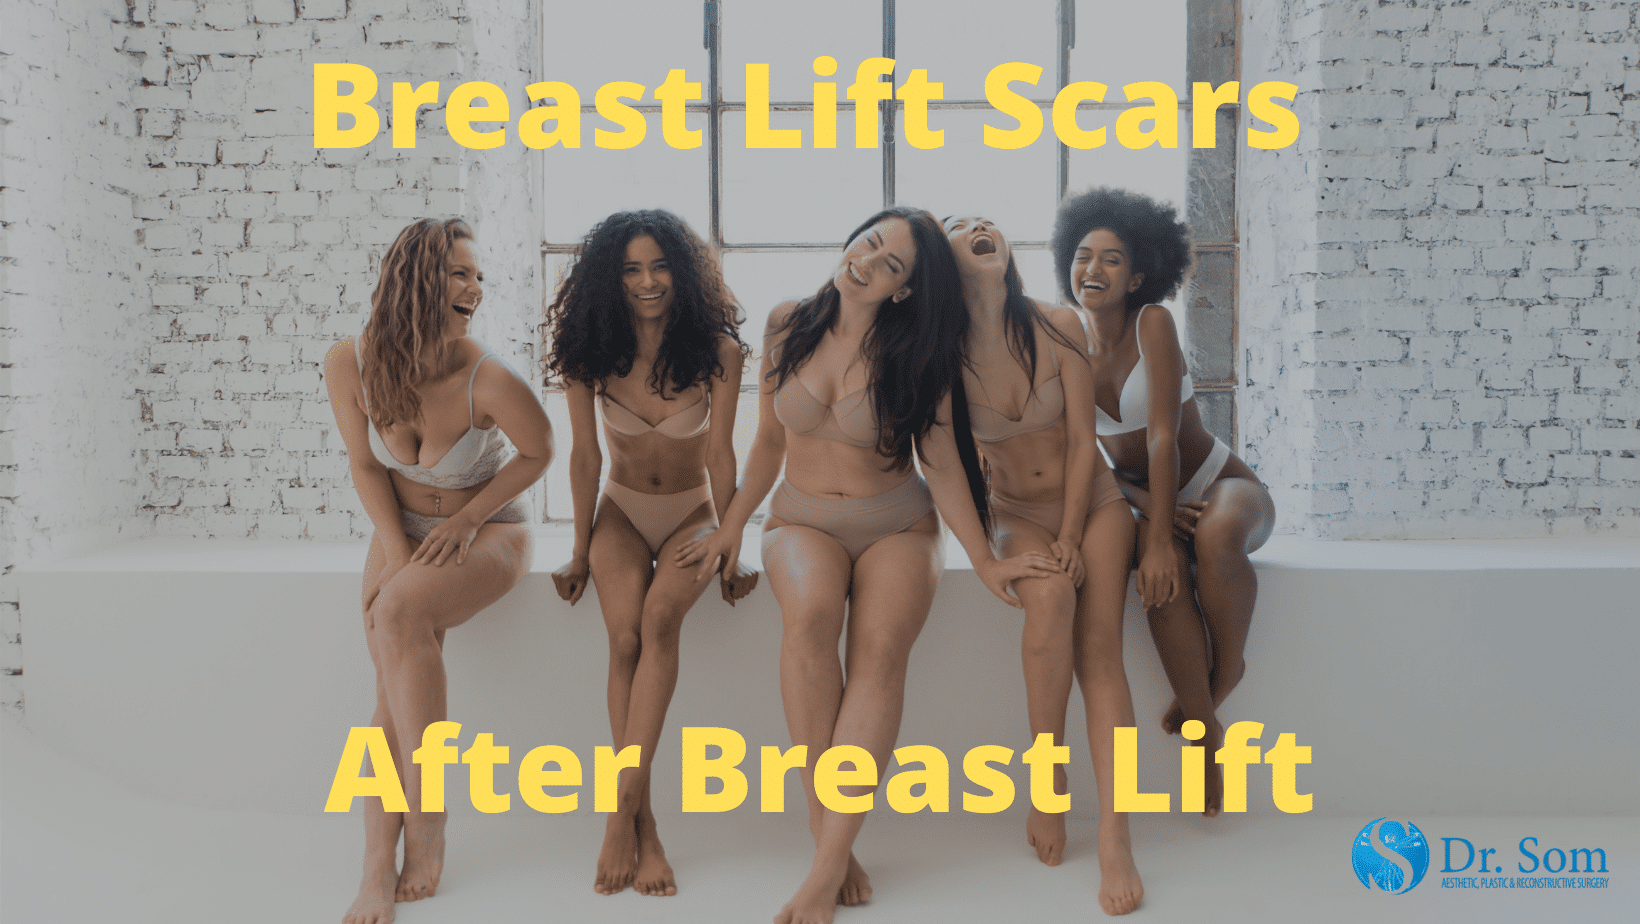 Will Thigh Lift Scars Be Visible In A Bikini?